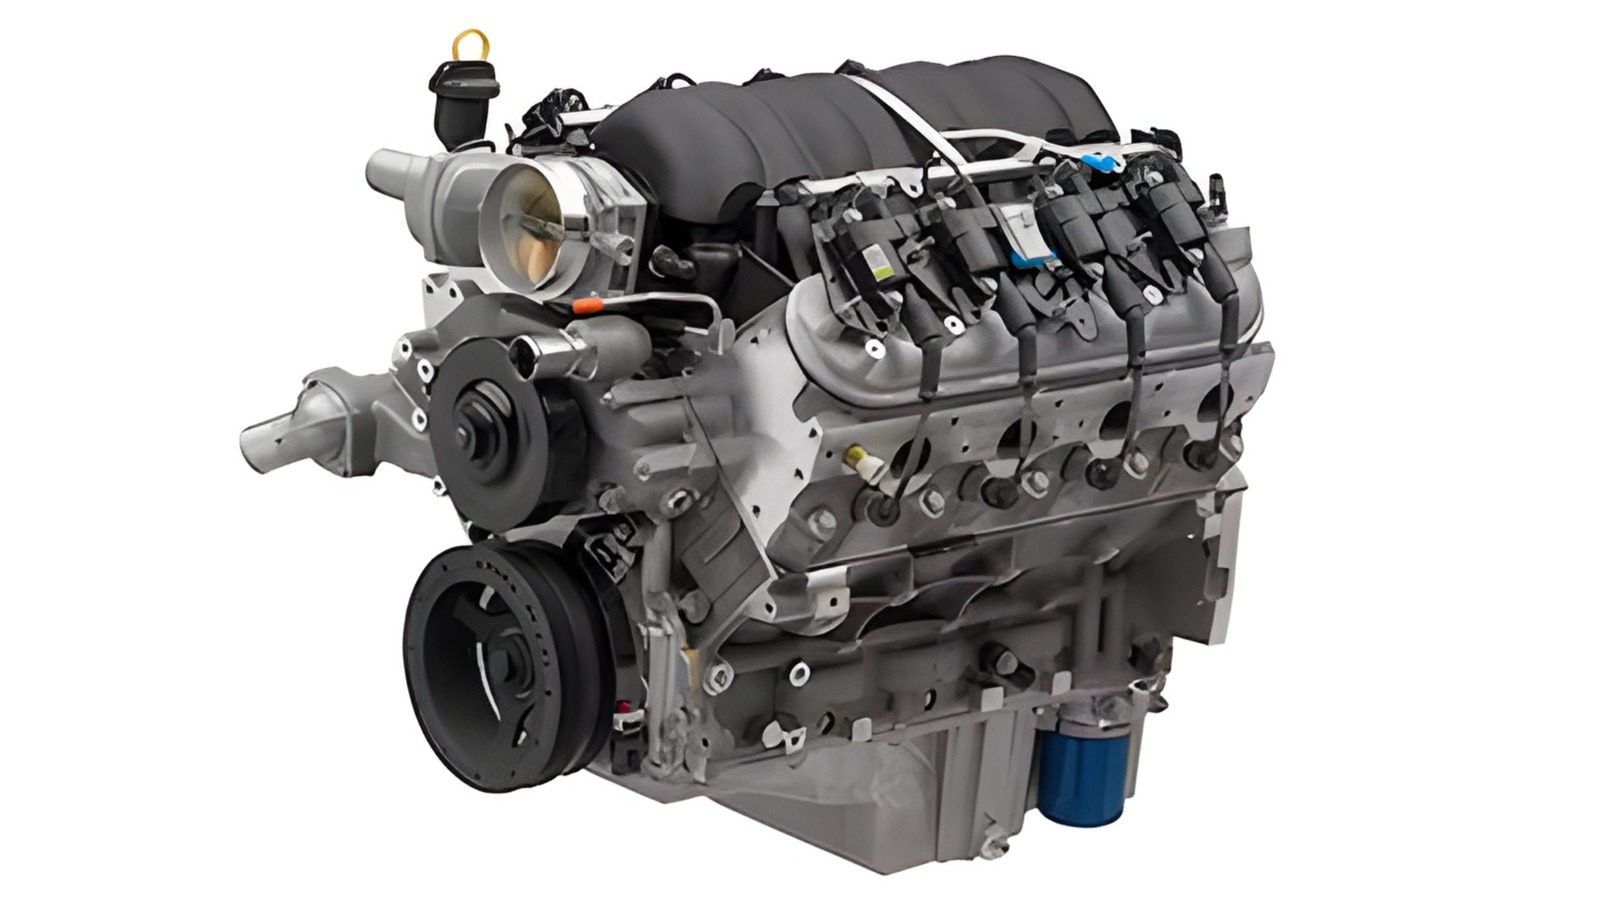 The Best And Worst Years For The Chevy 350 V8 Engine